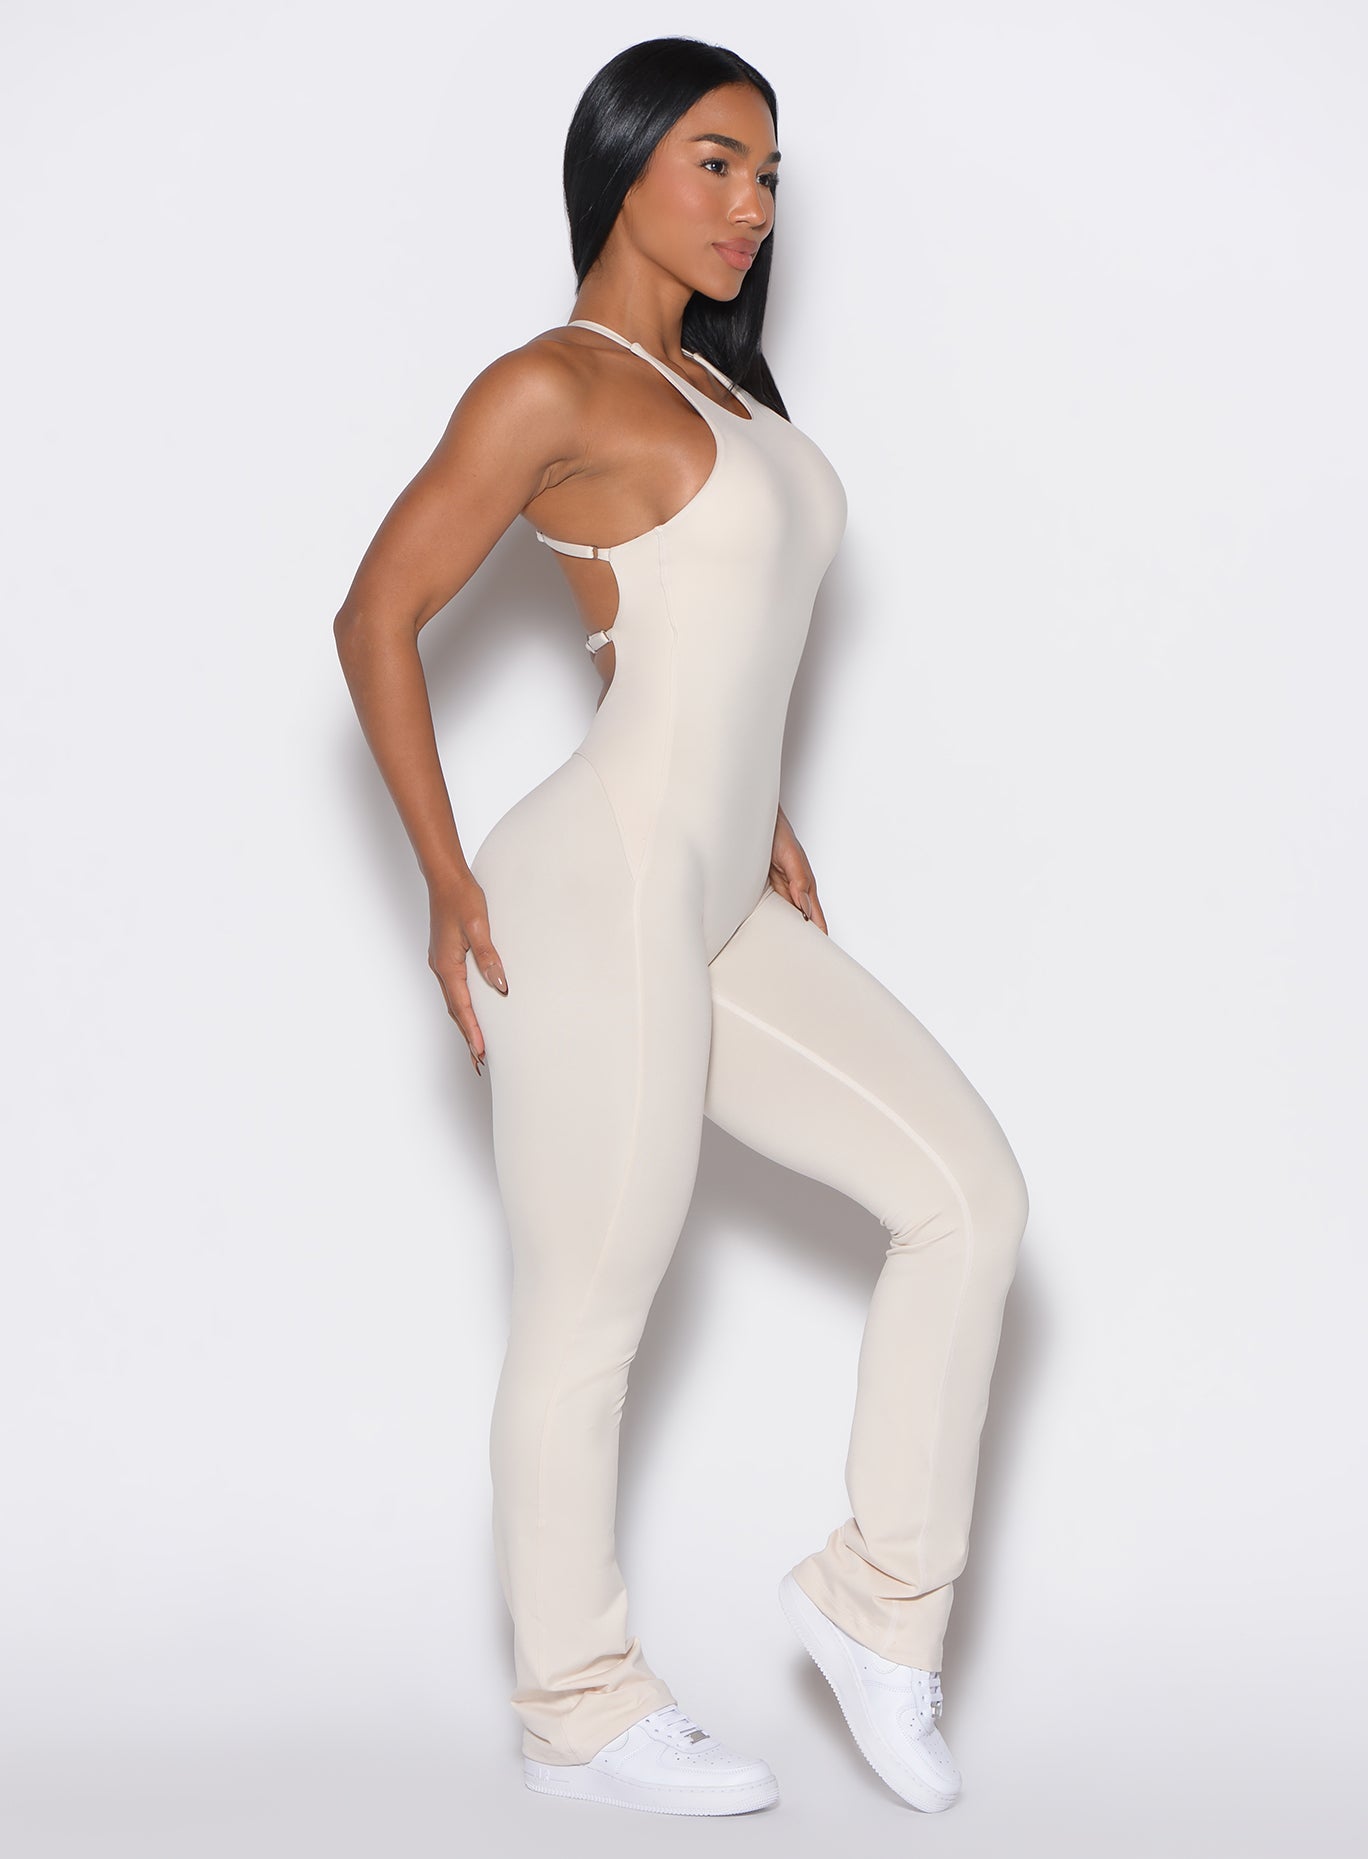 right side profile view of a model wearing our bombshell bunny bodysuit in Almond Milk color